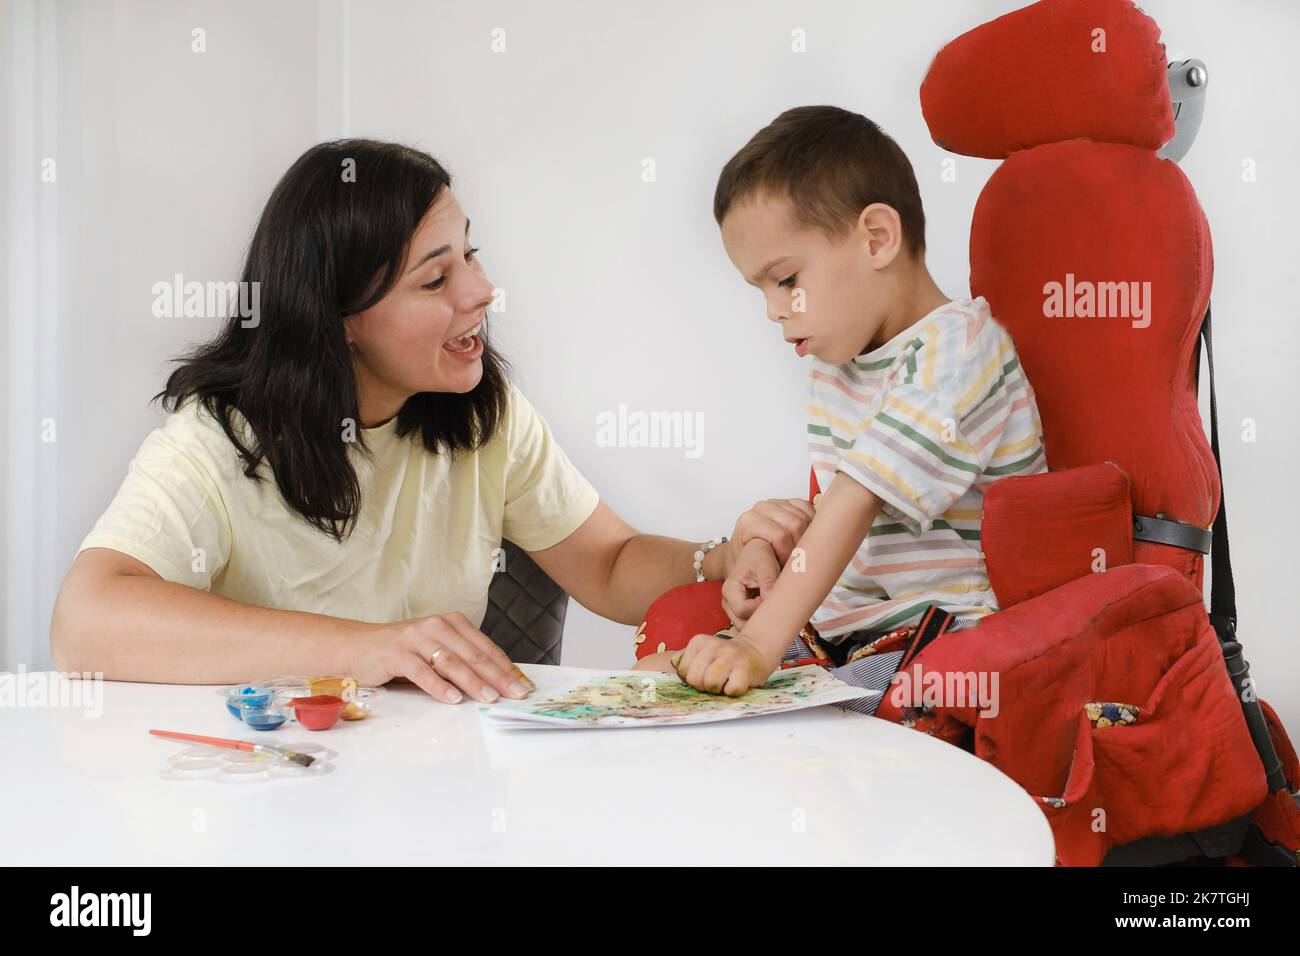 Child with cerebral palsy painting with fingers and hands boy that has health problems developing fine motor skills Education for children with mental Stock Photo